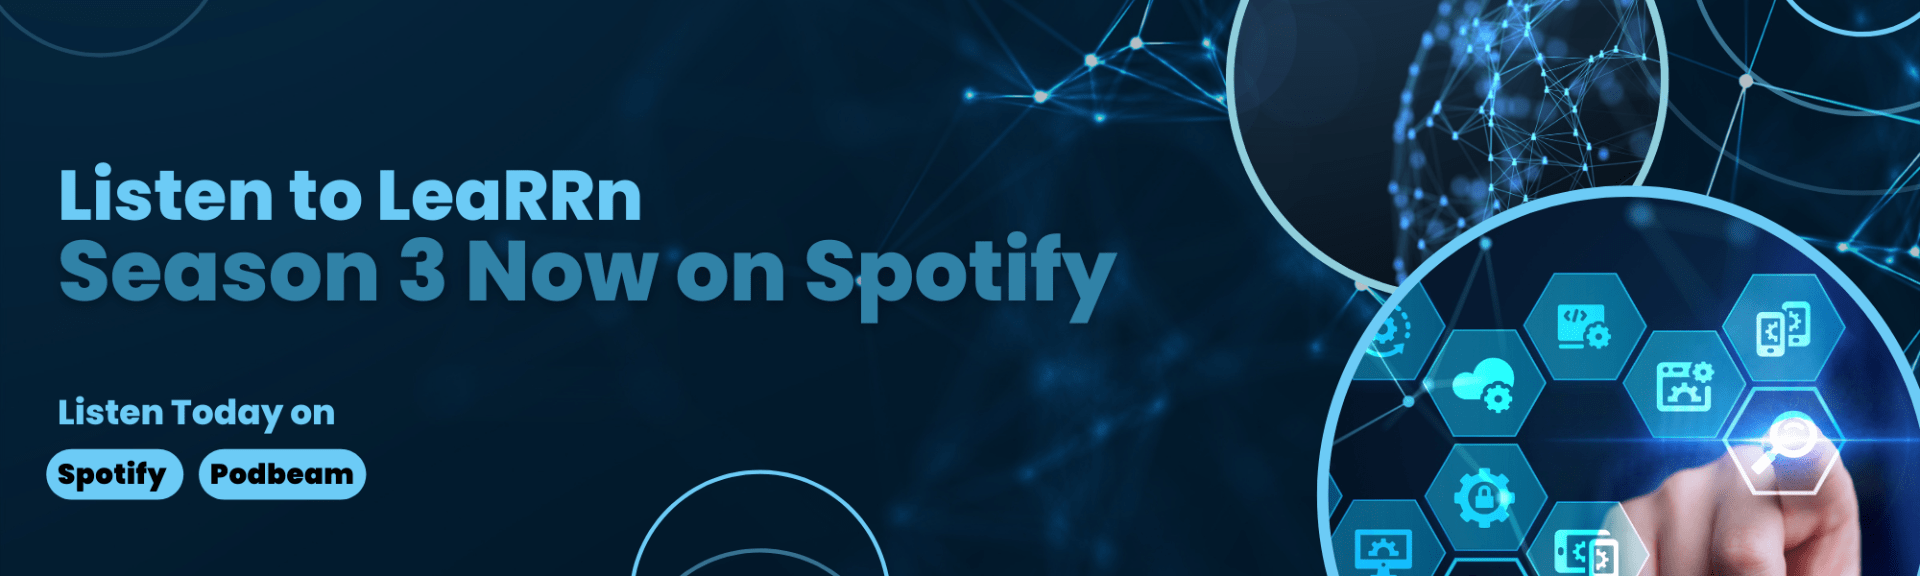 click here to visit spotify. White text on blue and navy background fading in and out. White spotify logo on right 